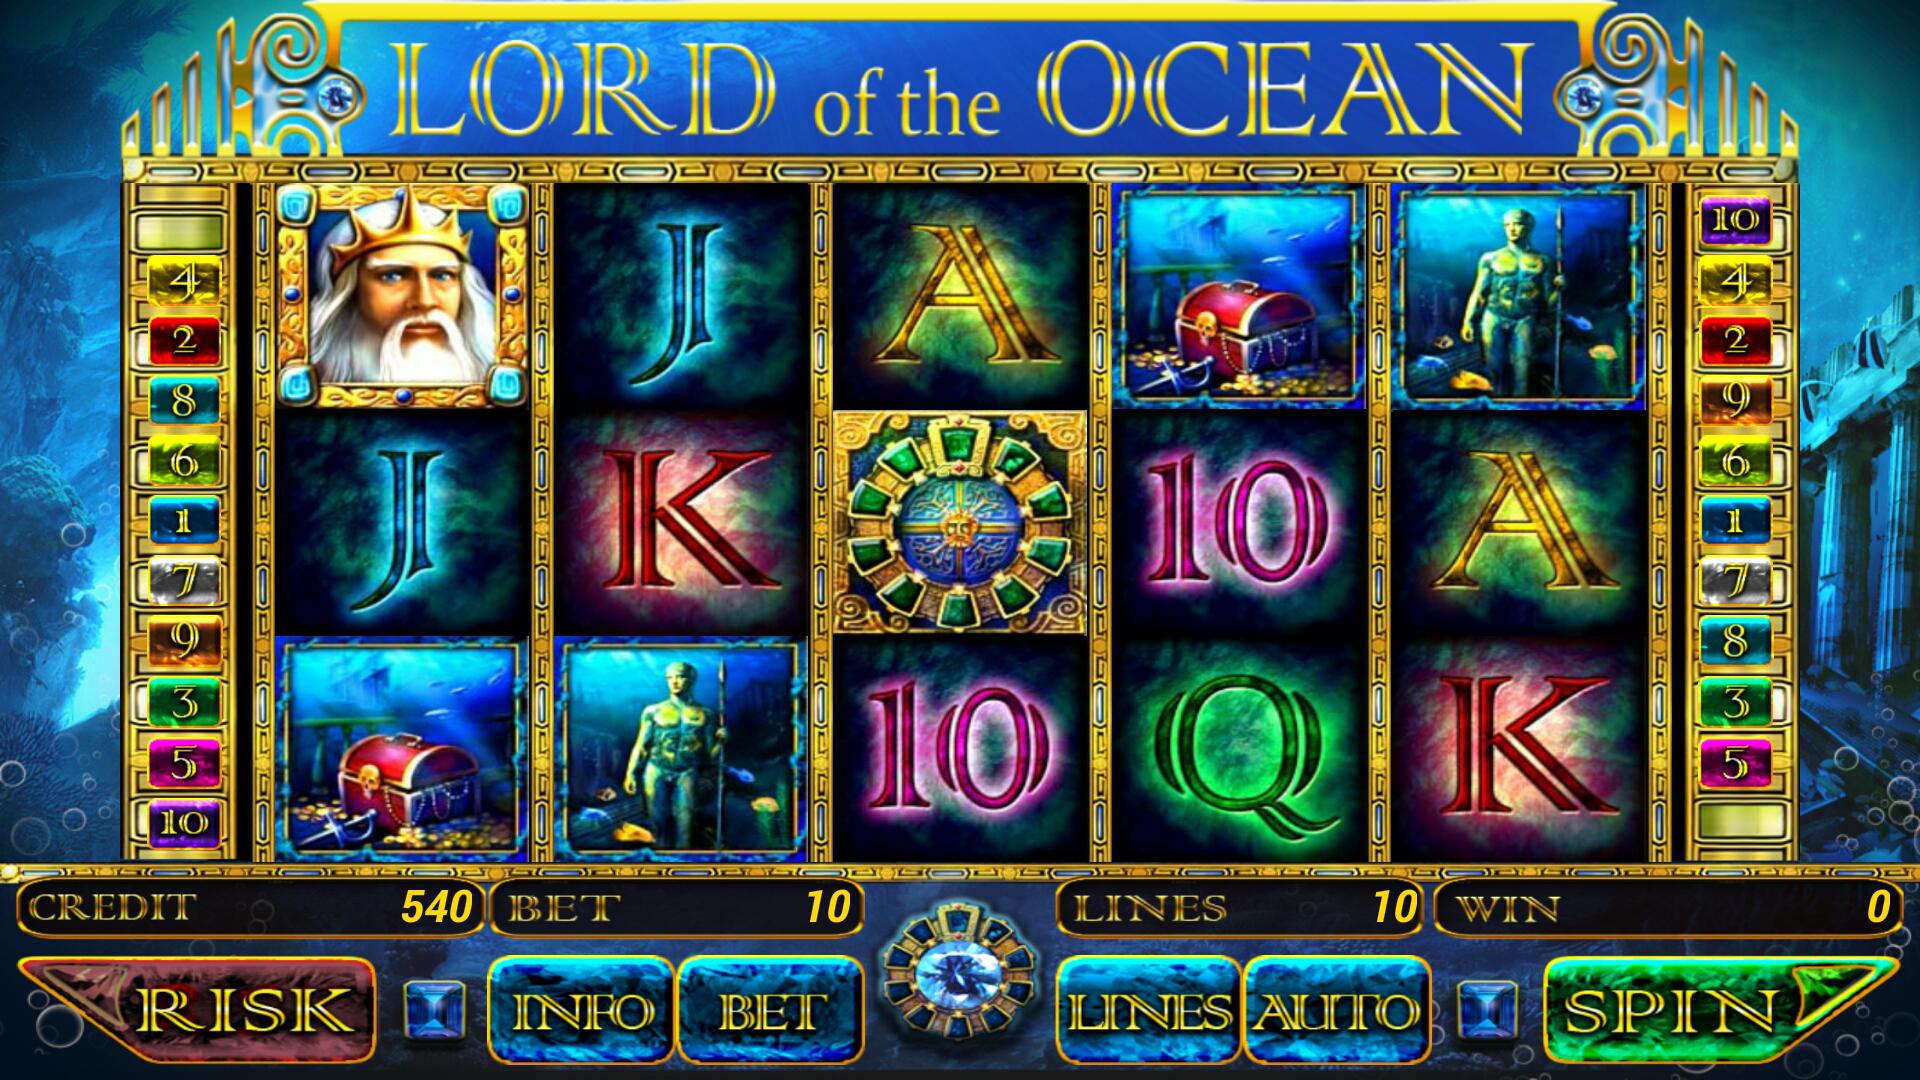  slot games for android free download Lord of the Ocean Free Online Slots 